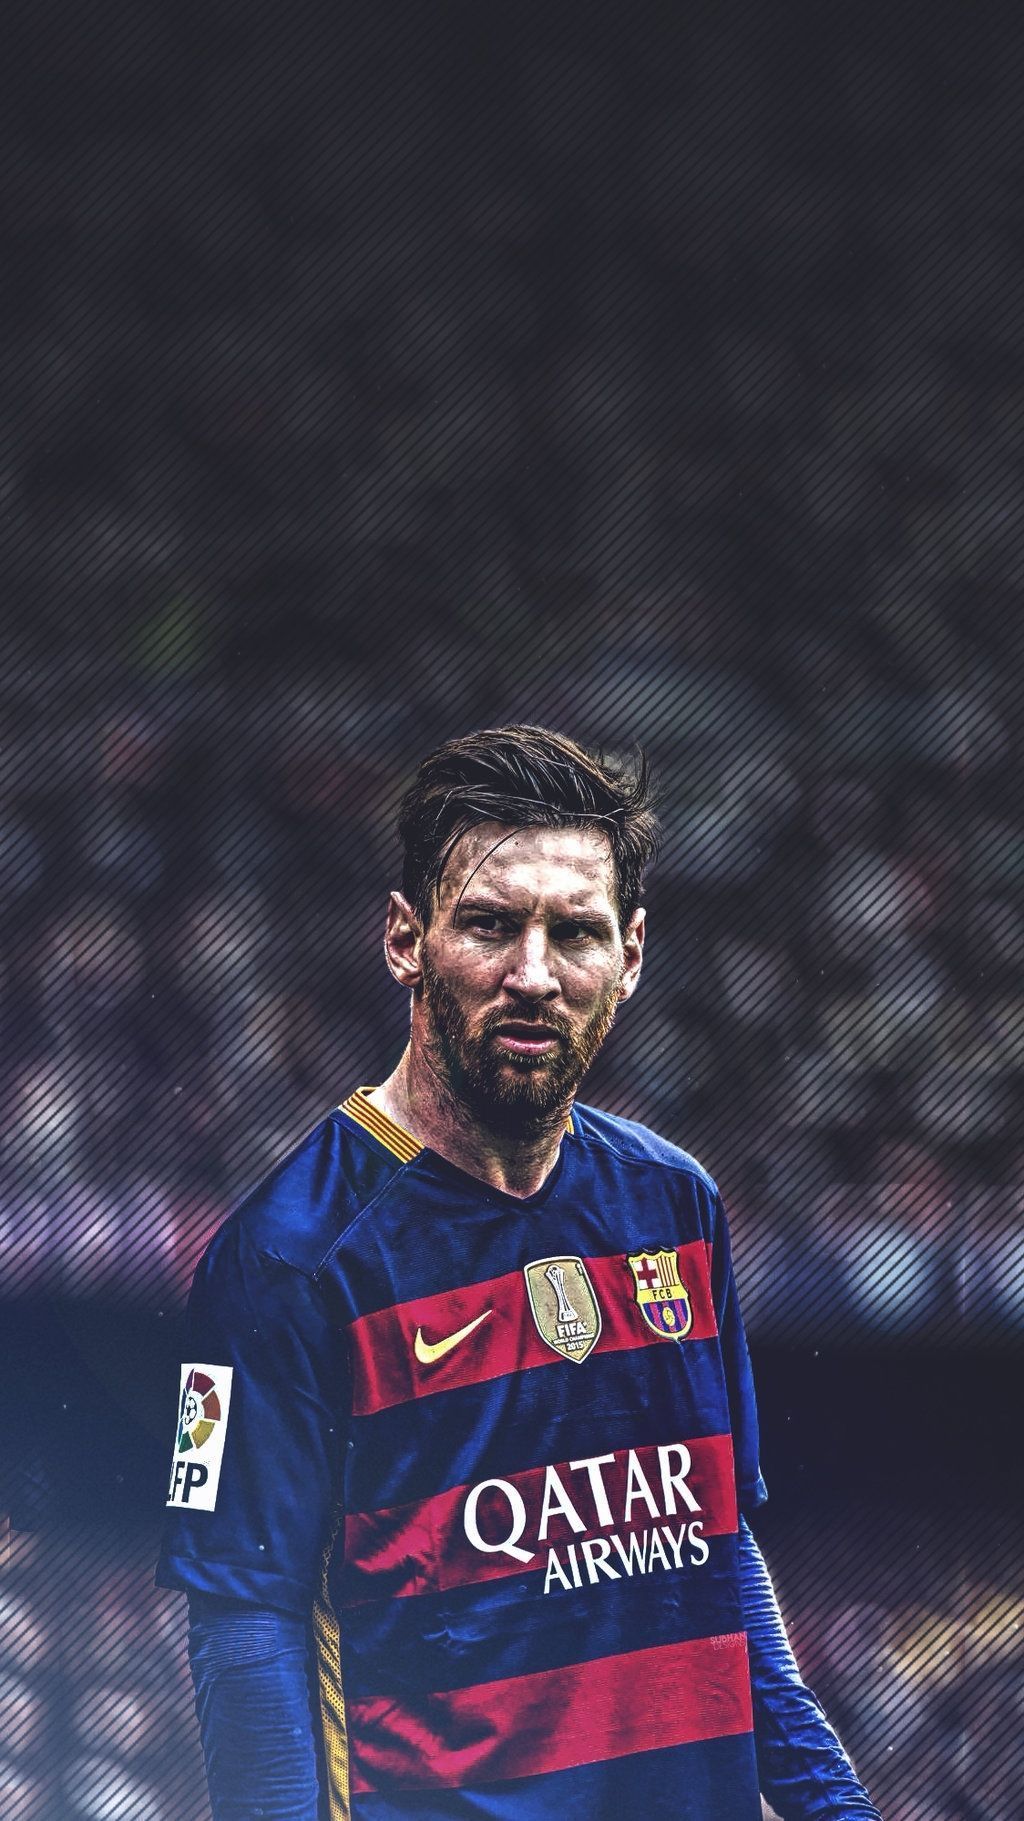 Lionel Messi iPhone Wallpaper Free Lionel Messi iPhone Background